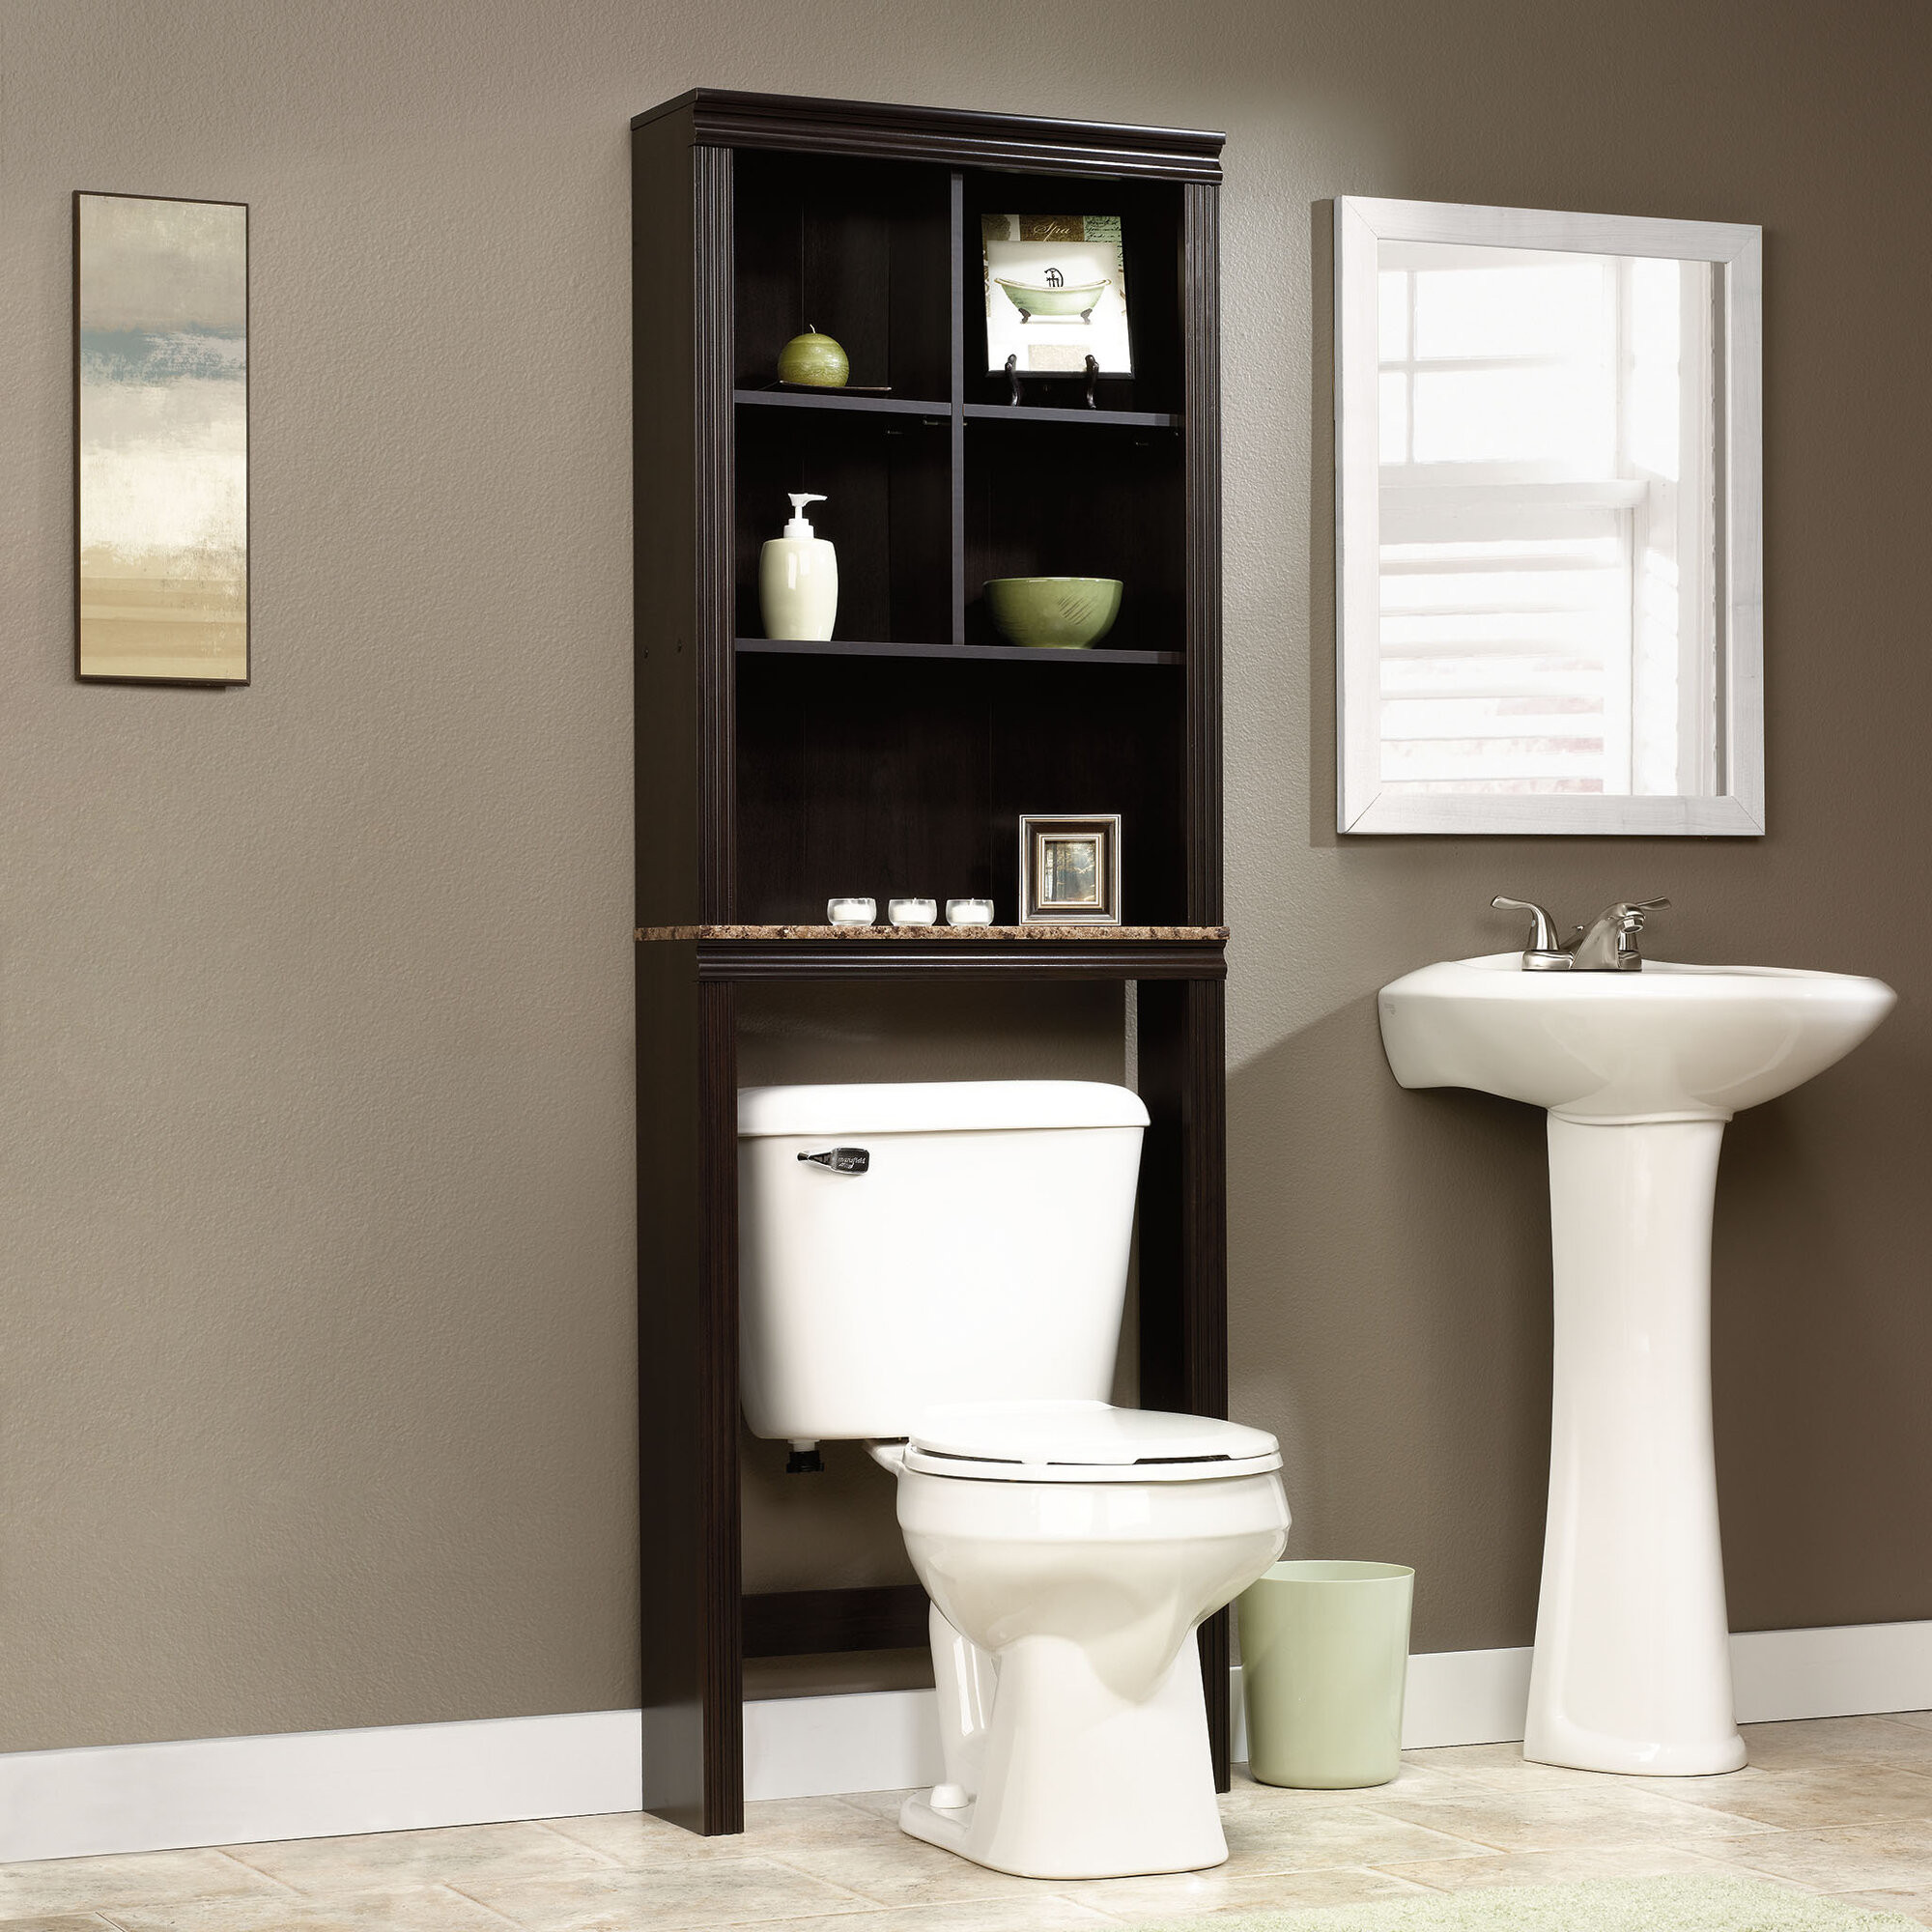 Bathroom Wall Shelves Over Toilet
 Over The Toilet Storage Bathroom Space Saver Cubby